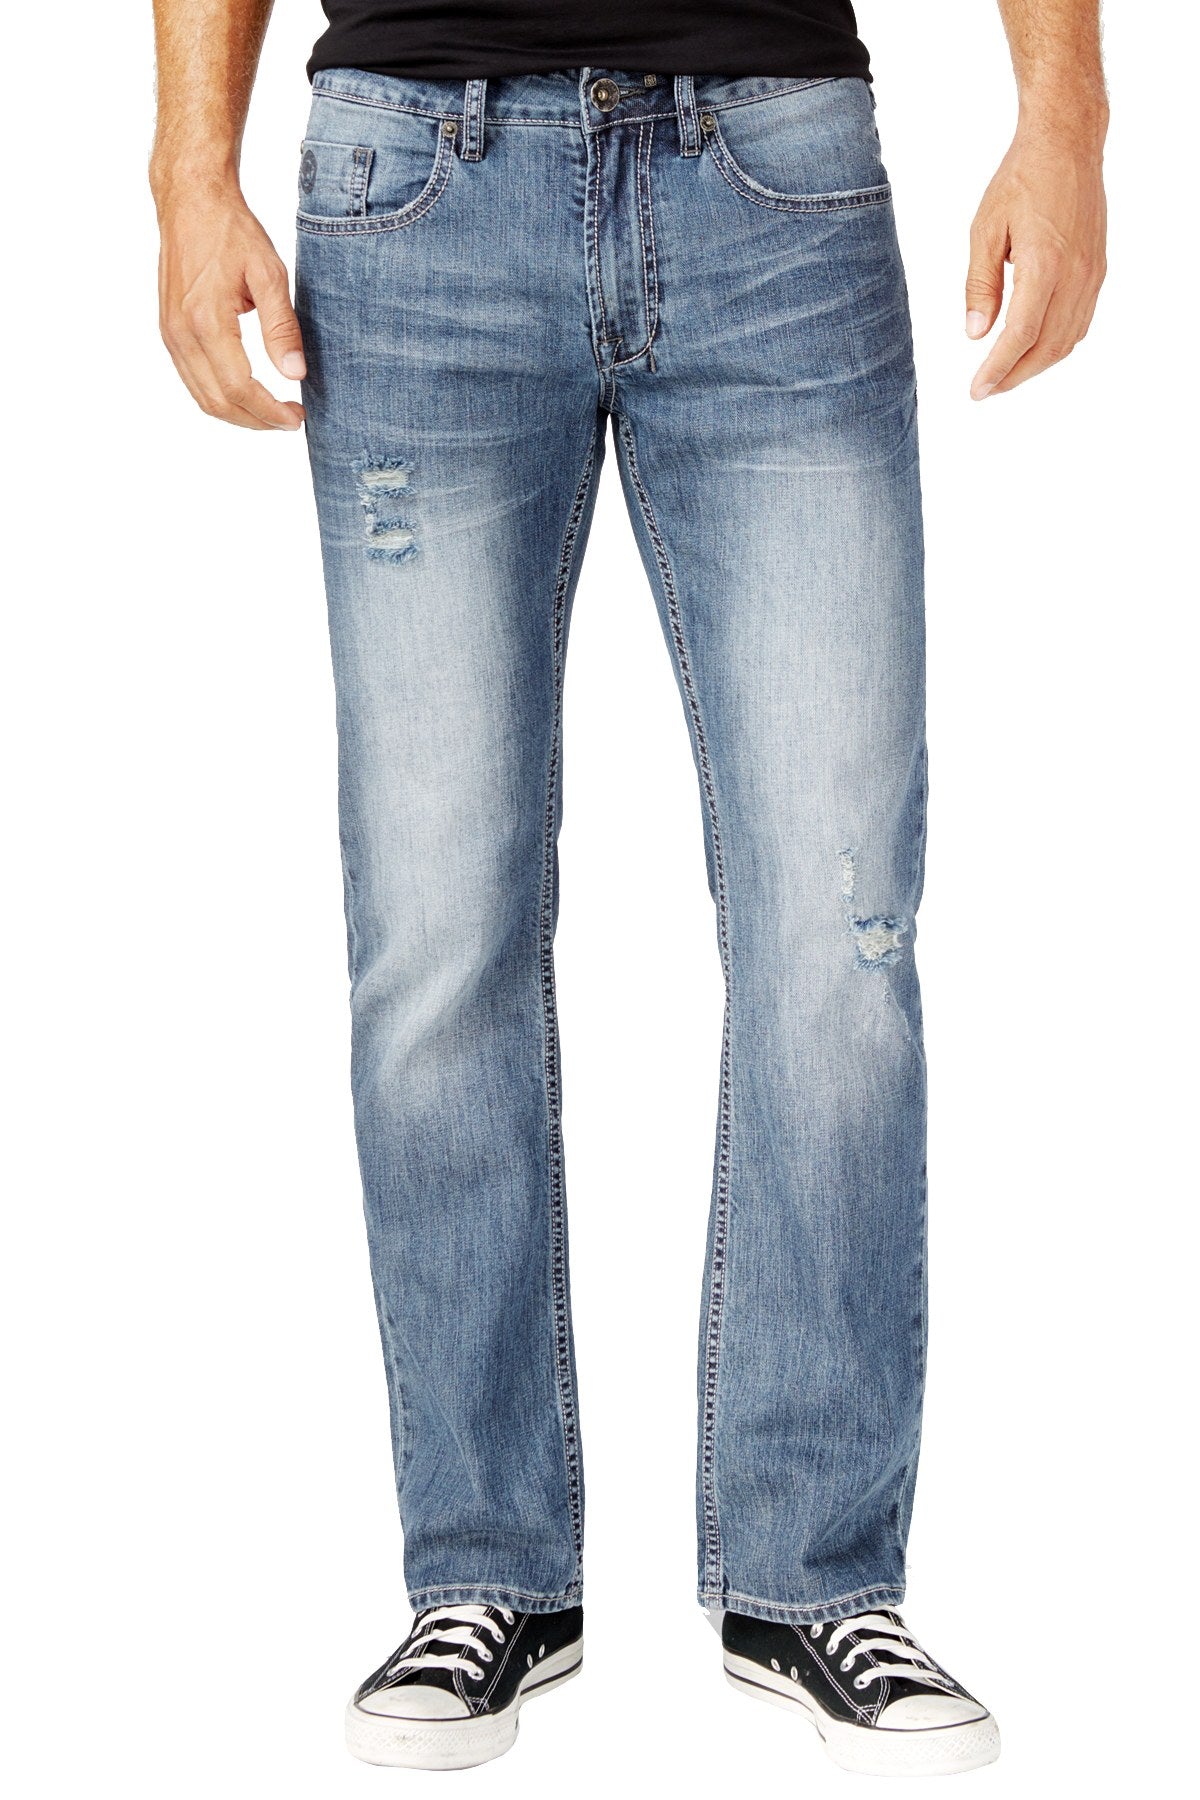 Buffalo by David Bitton Blasted-Blue Driven-X Straight-Stretch Relaxed ...